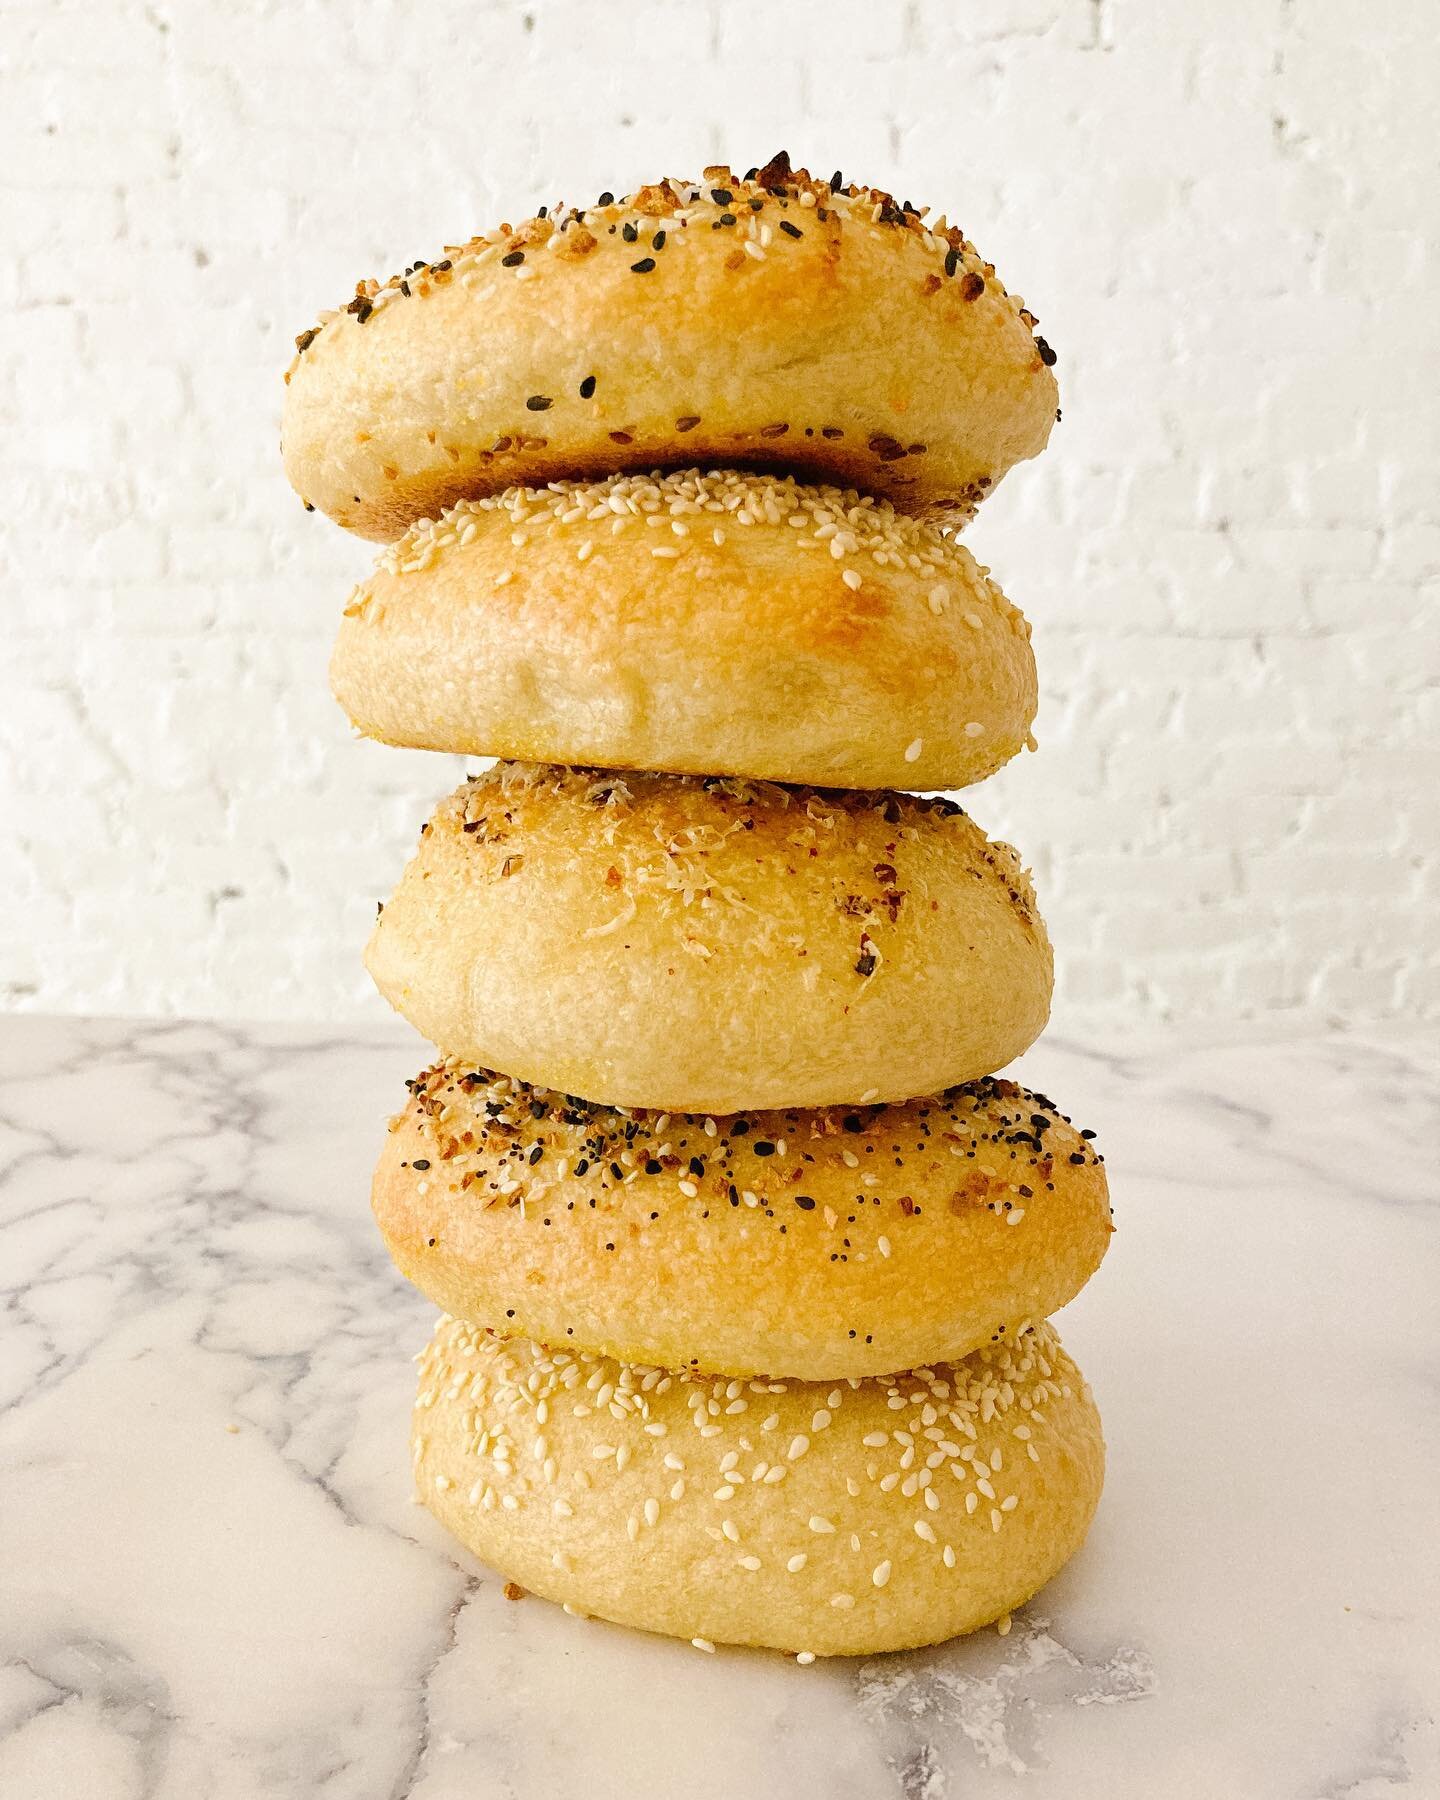 Have you ever wondered what makes a really great bagel?  Time, and lots of it!  Any guesses how many days it&rsquo;s going to take for one of ours?